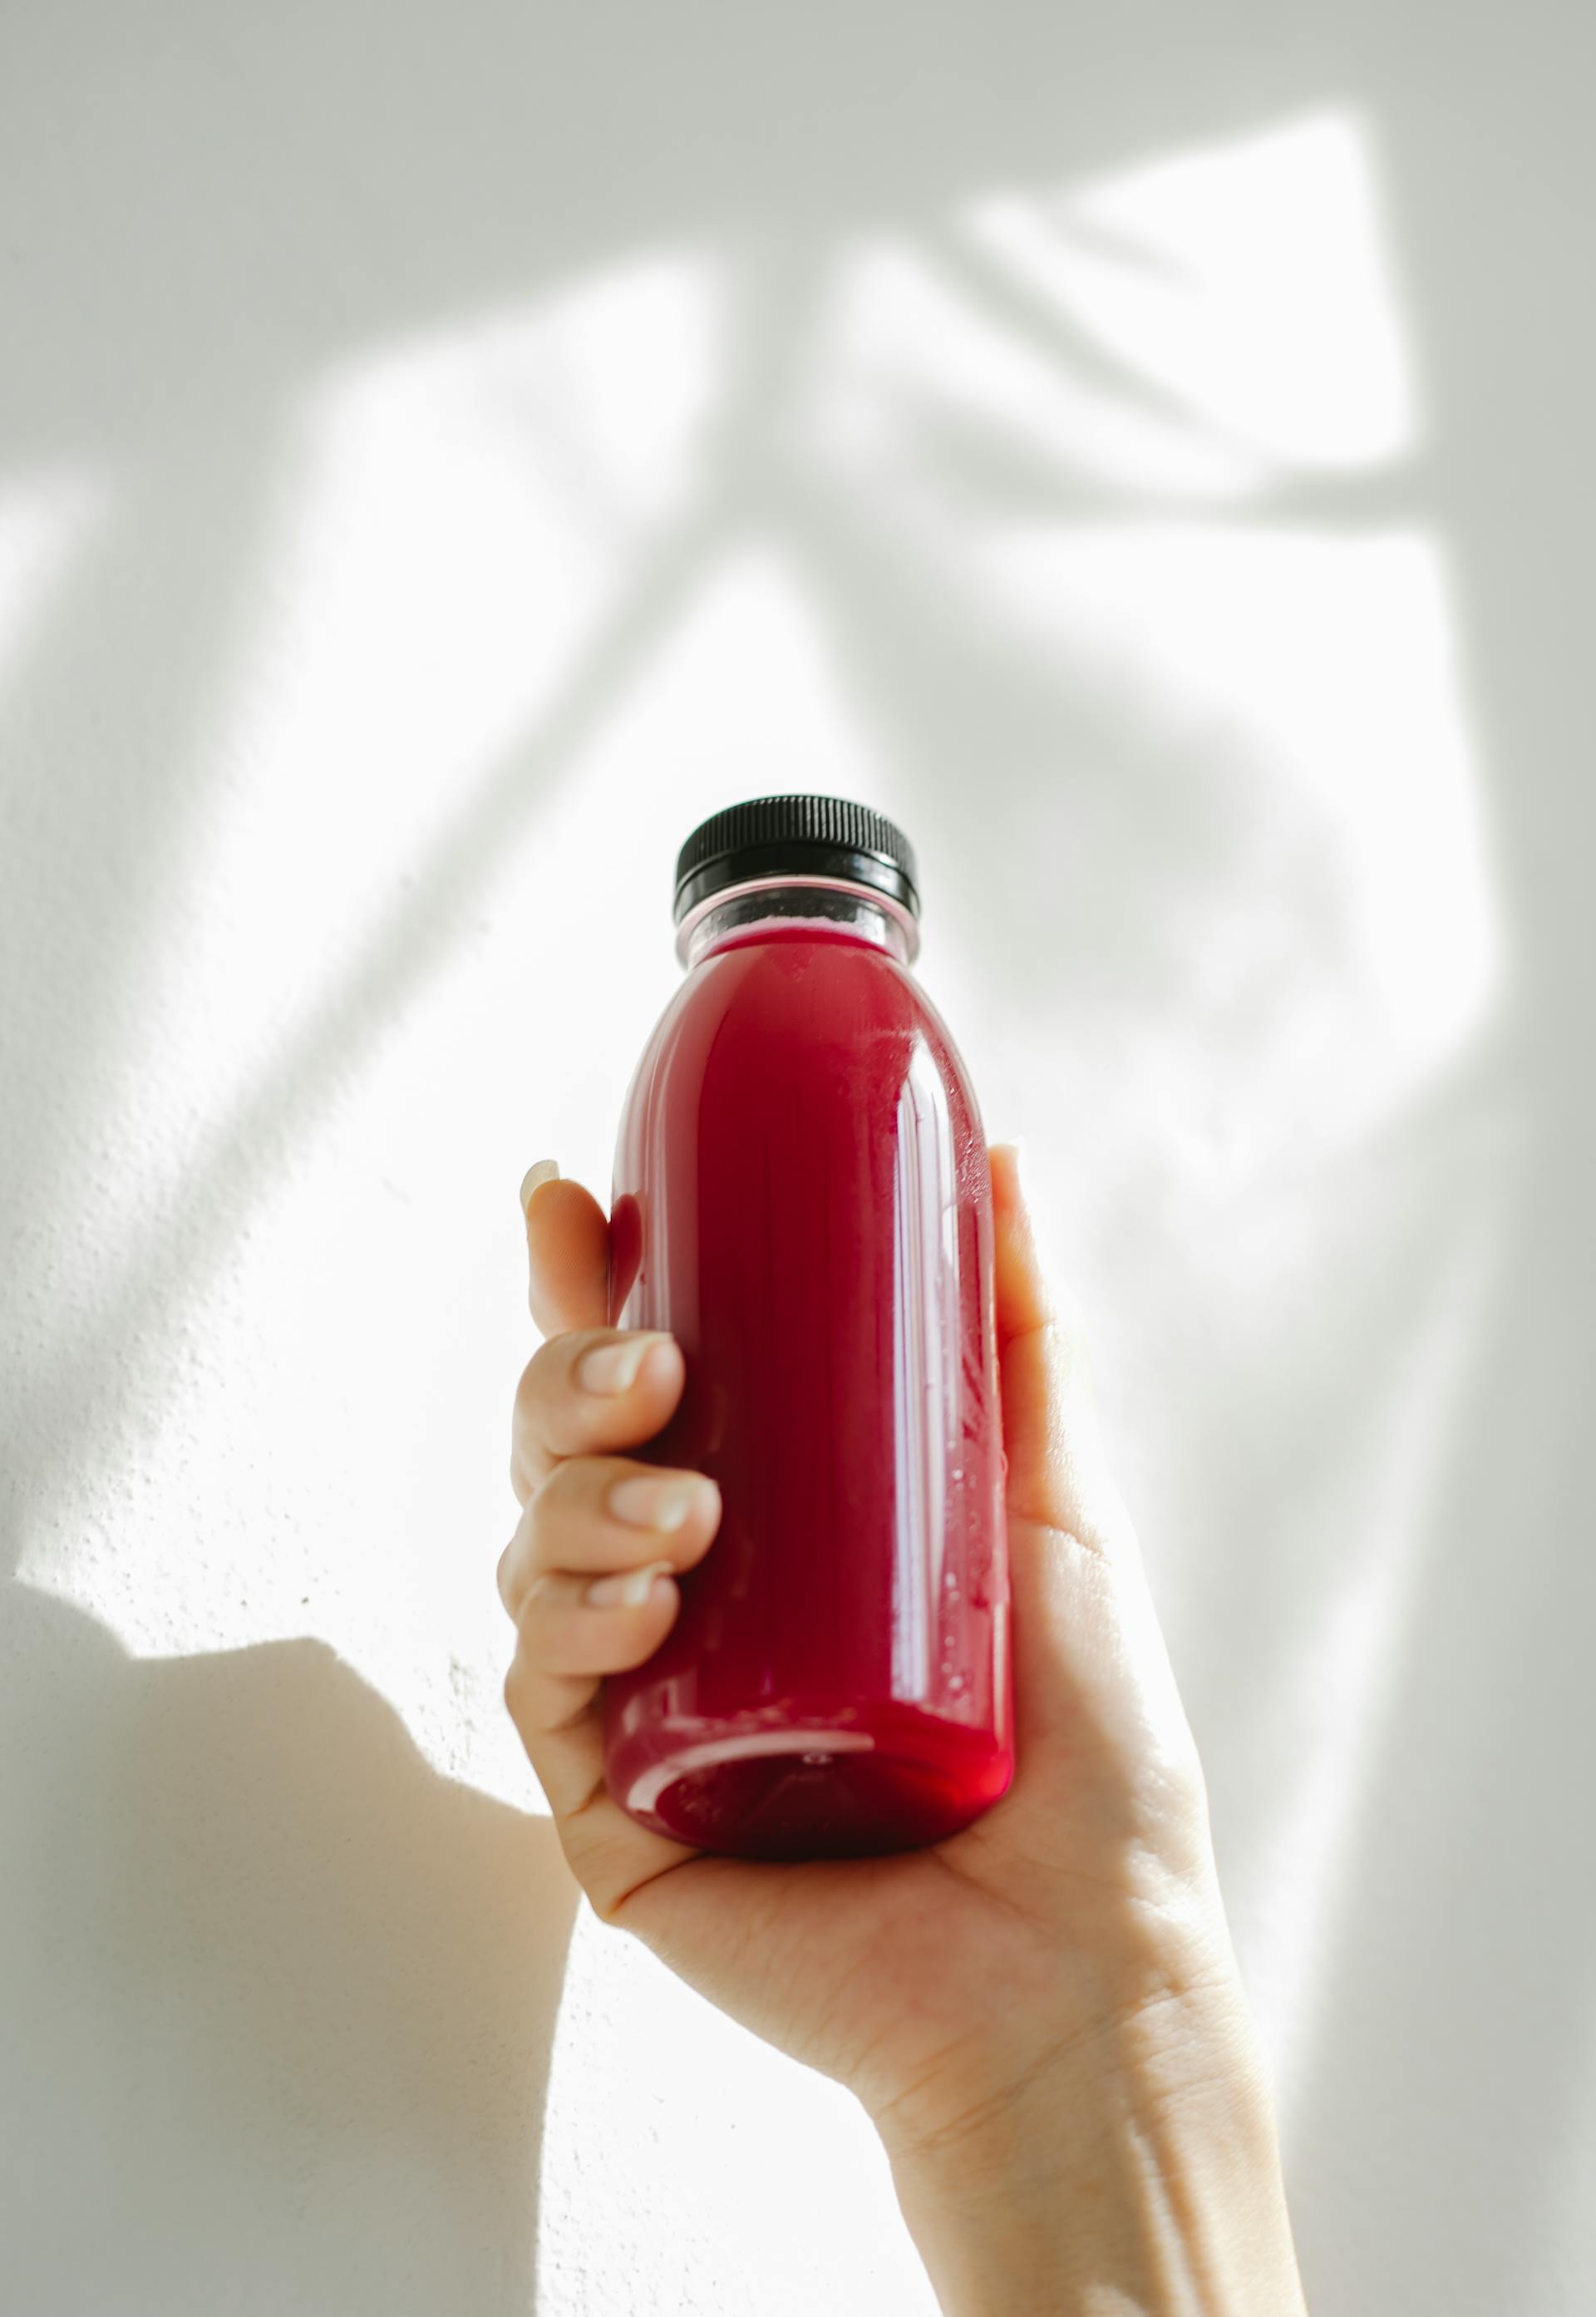 A person holding a bottle of juice | Source: Pexels